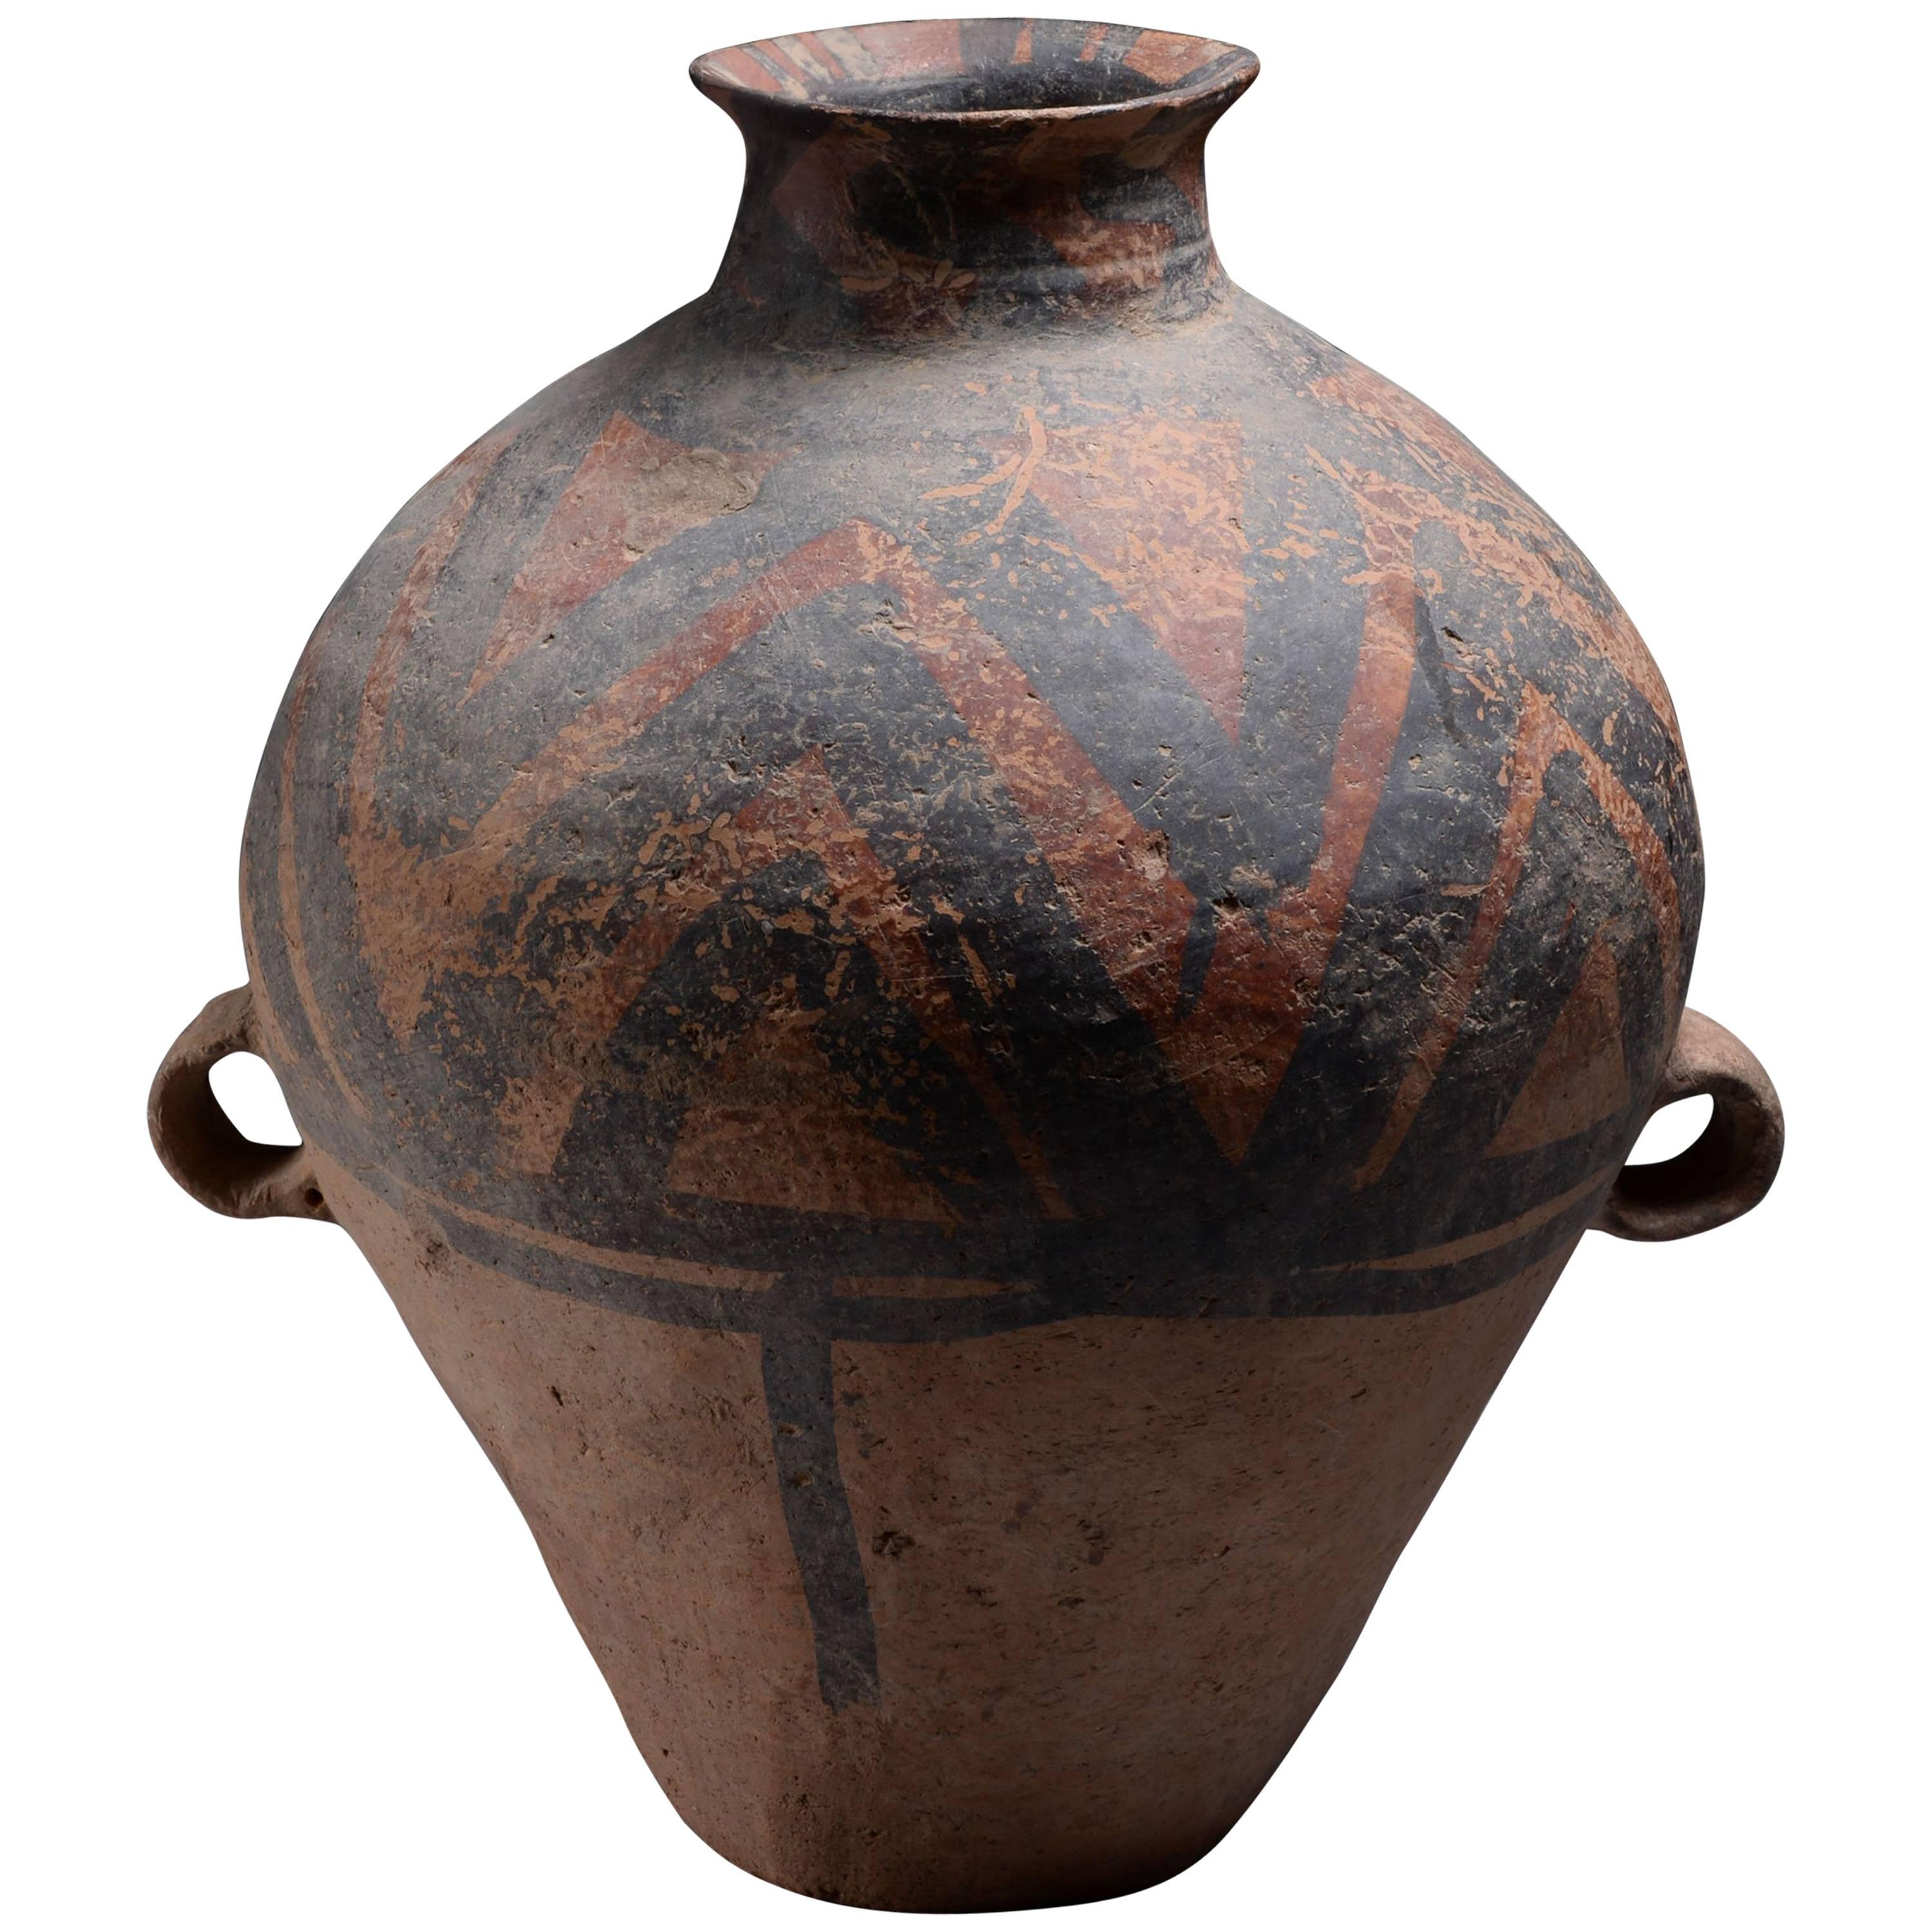 Ancient Chinese Neolithic Yangshao Culture Pottery Amphora, 3000 BC